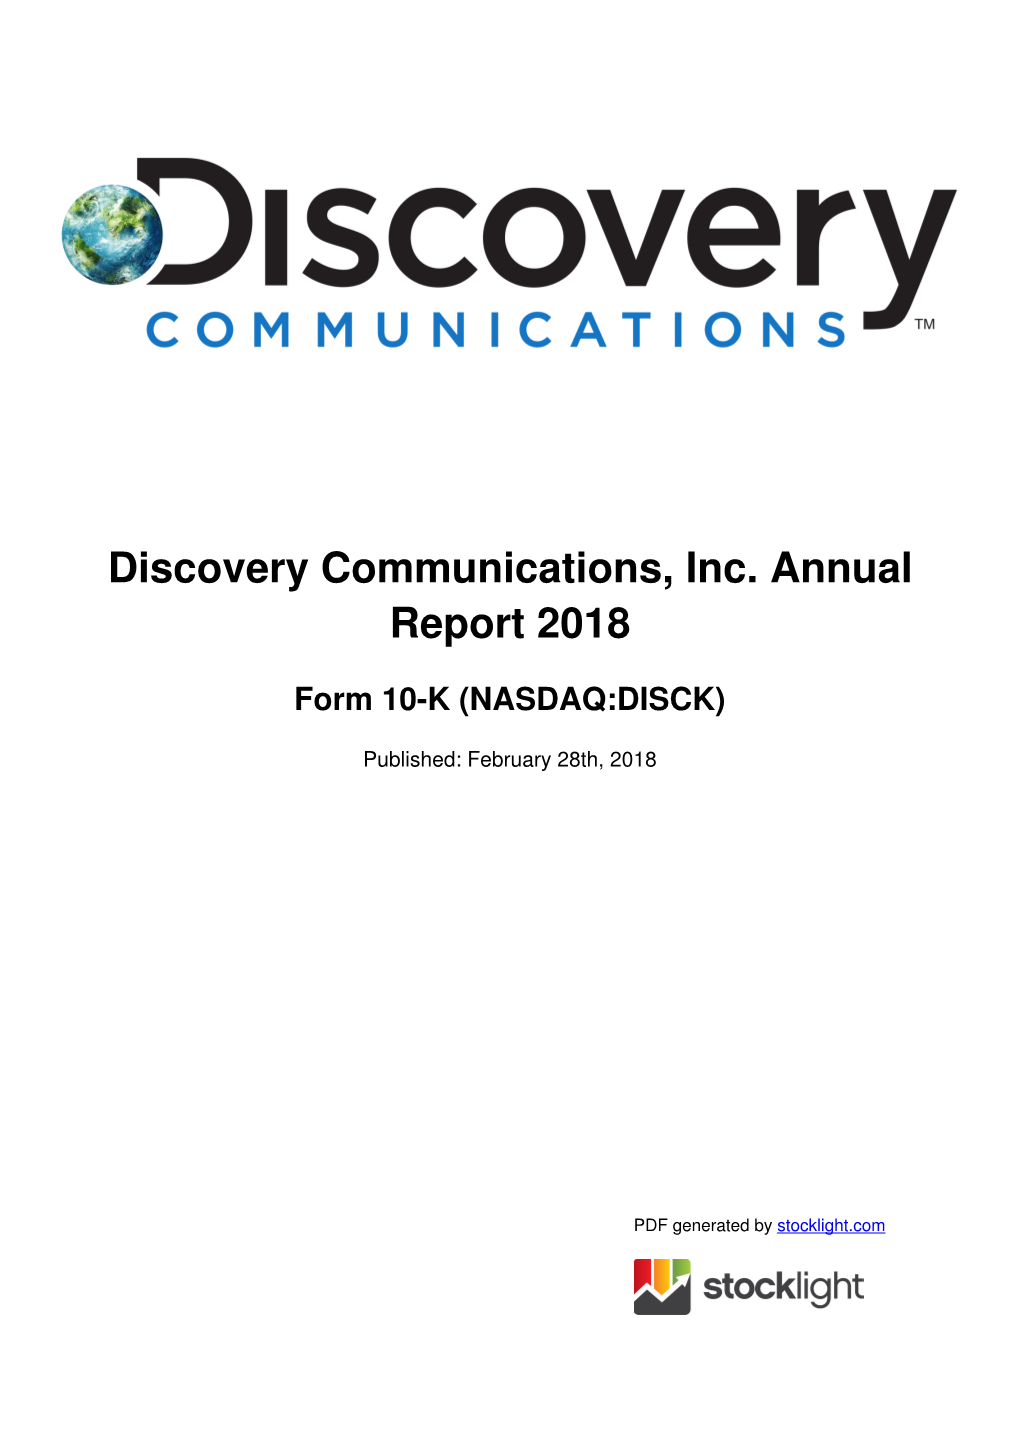 Discovery Communications, Inc. Annual Report 2018